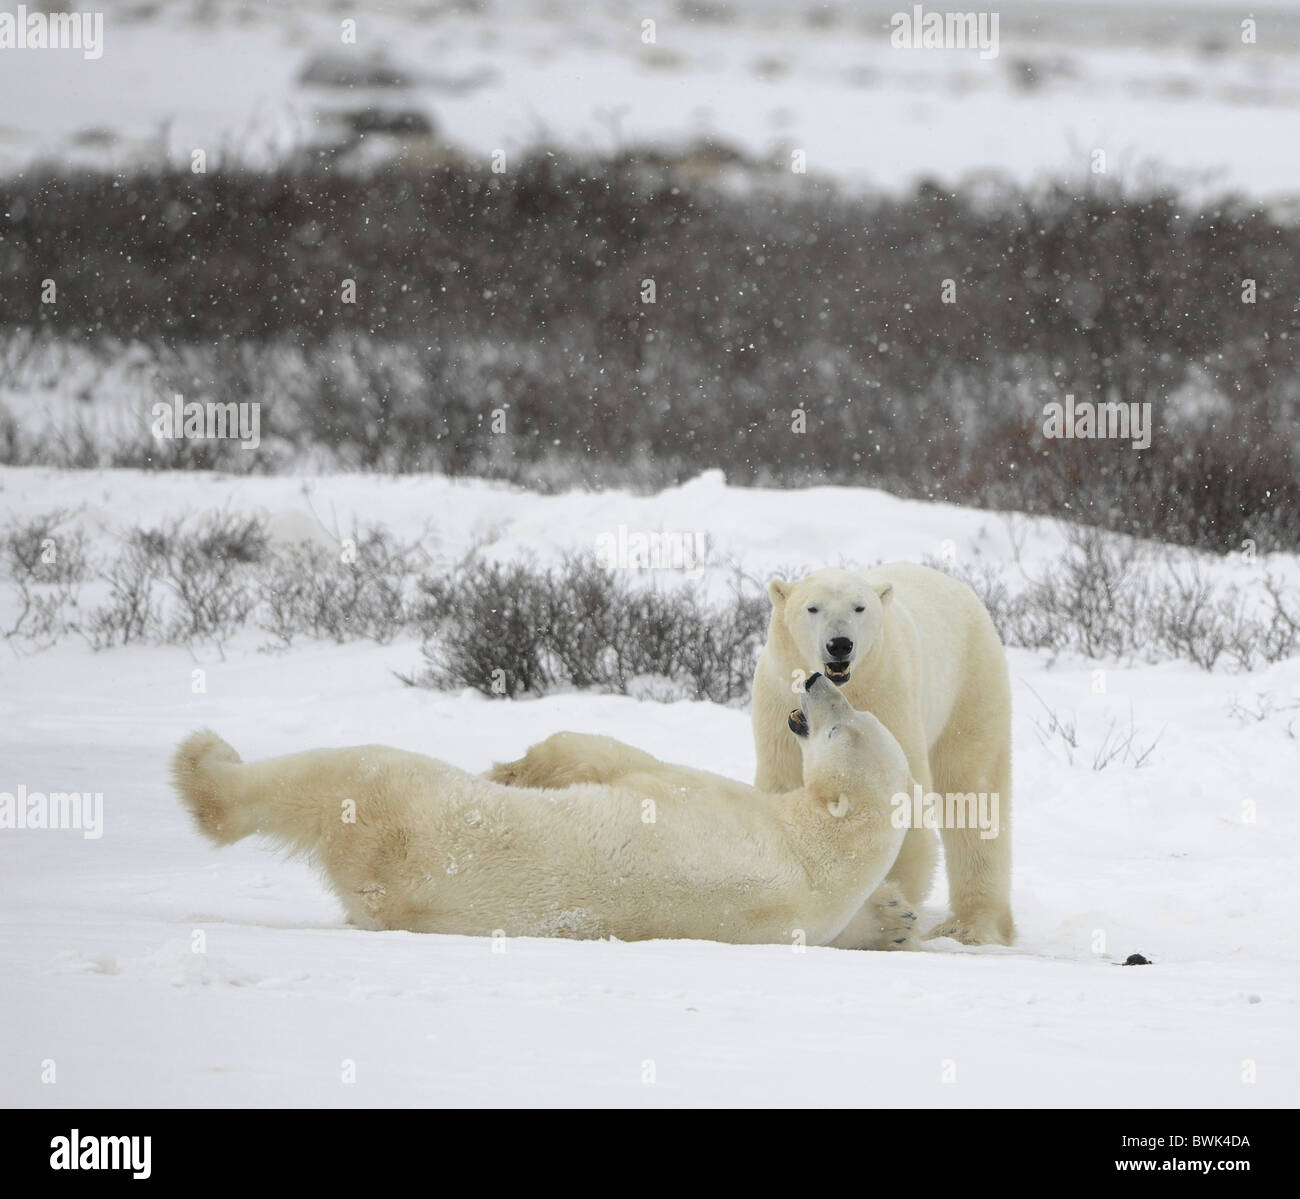 The couple of polar bears relaxes. Polar bears play. It is snowing. Stock Photo